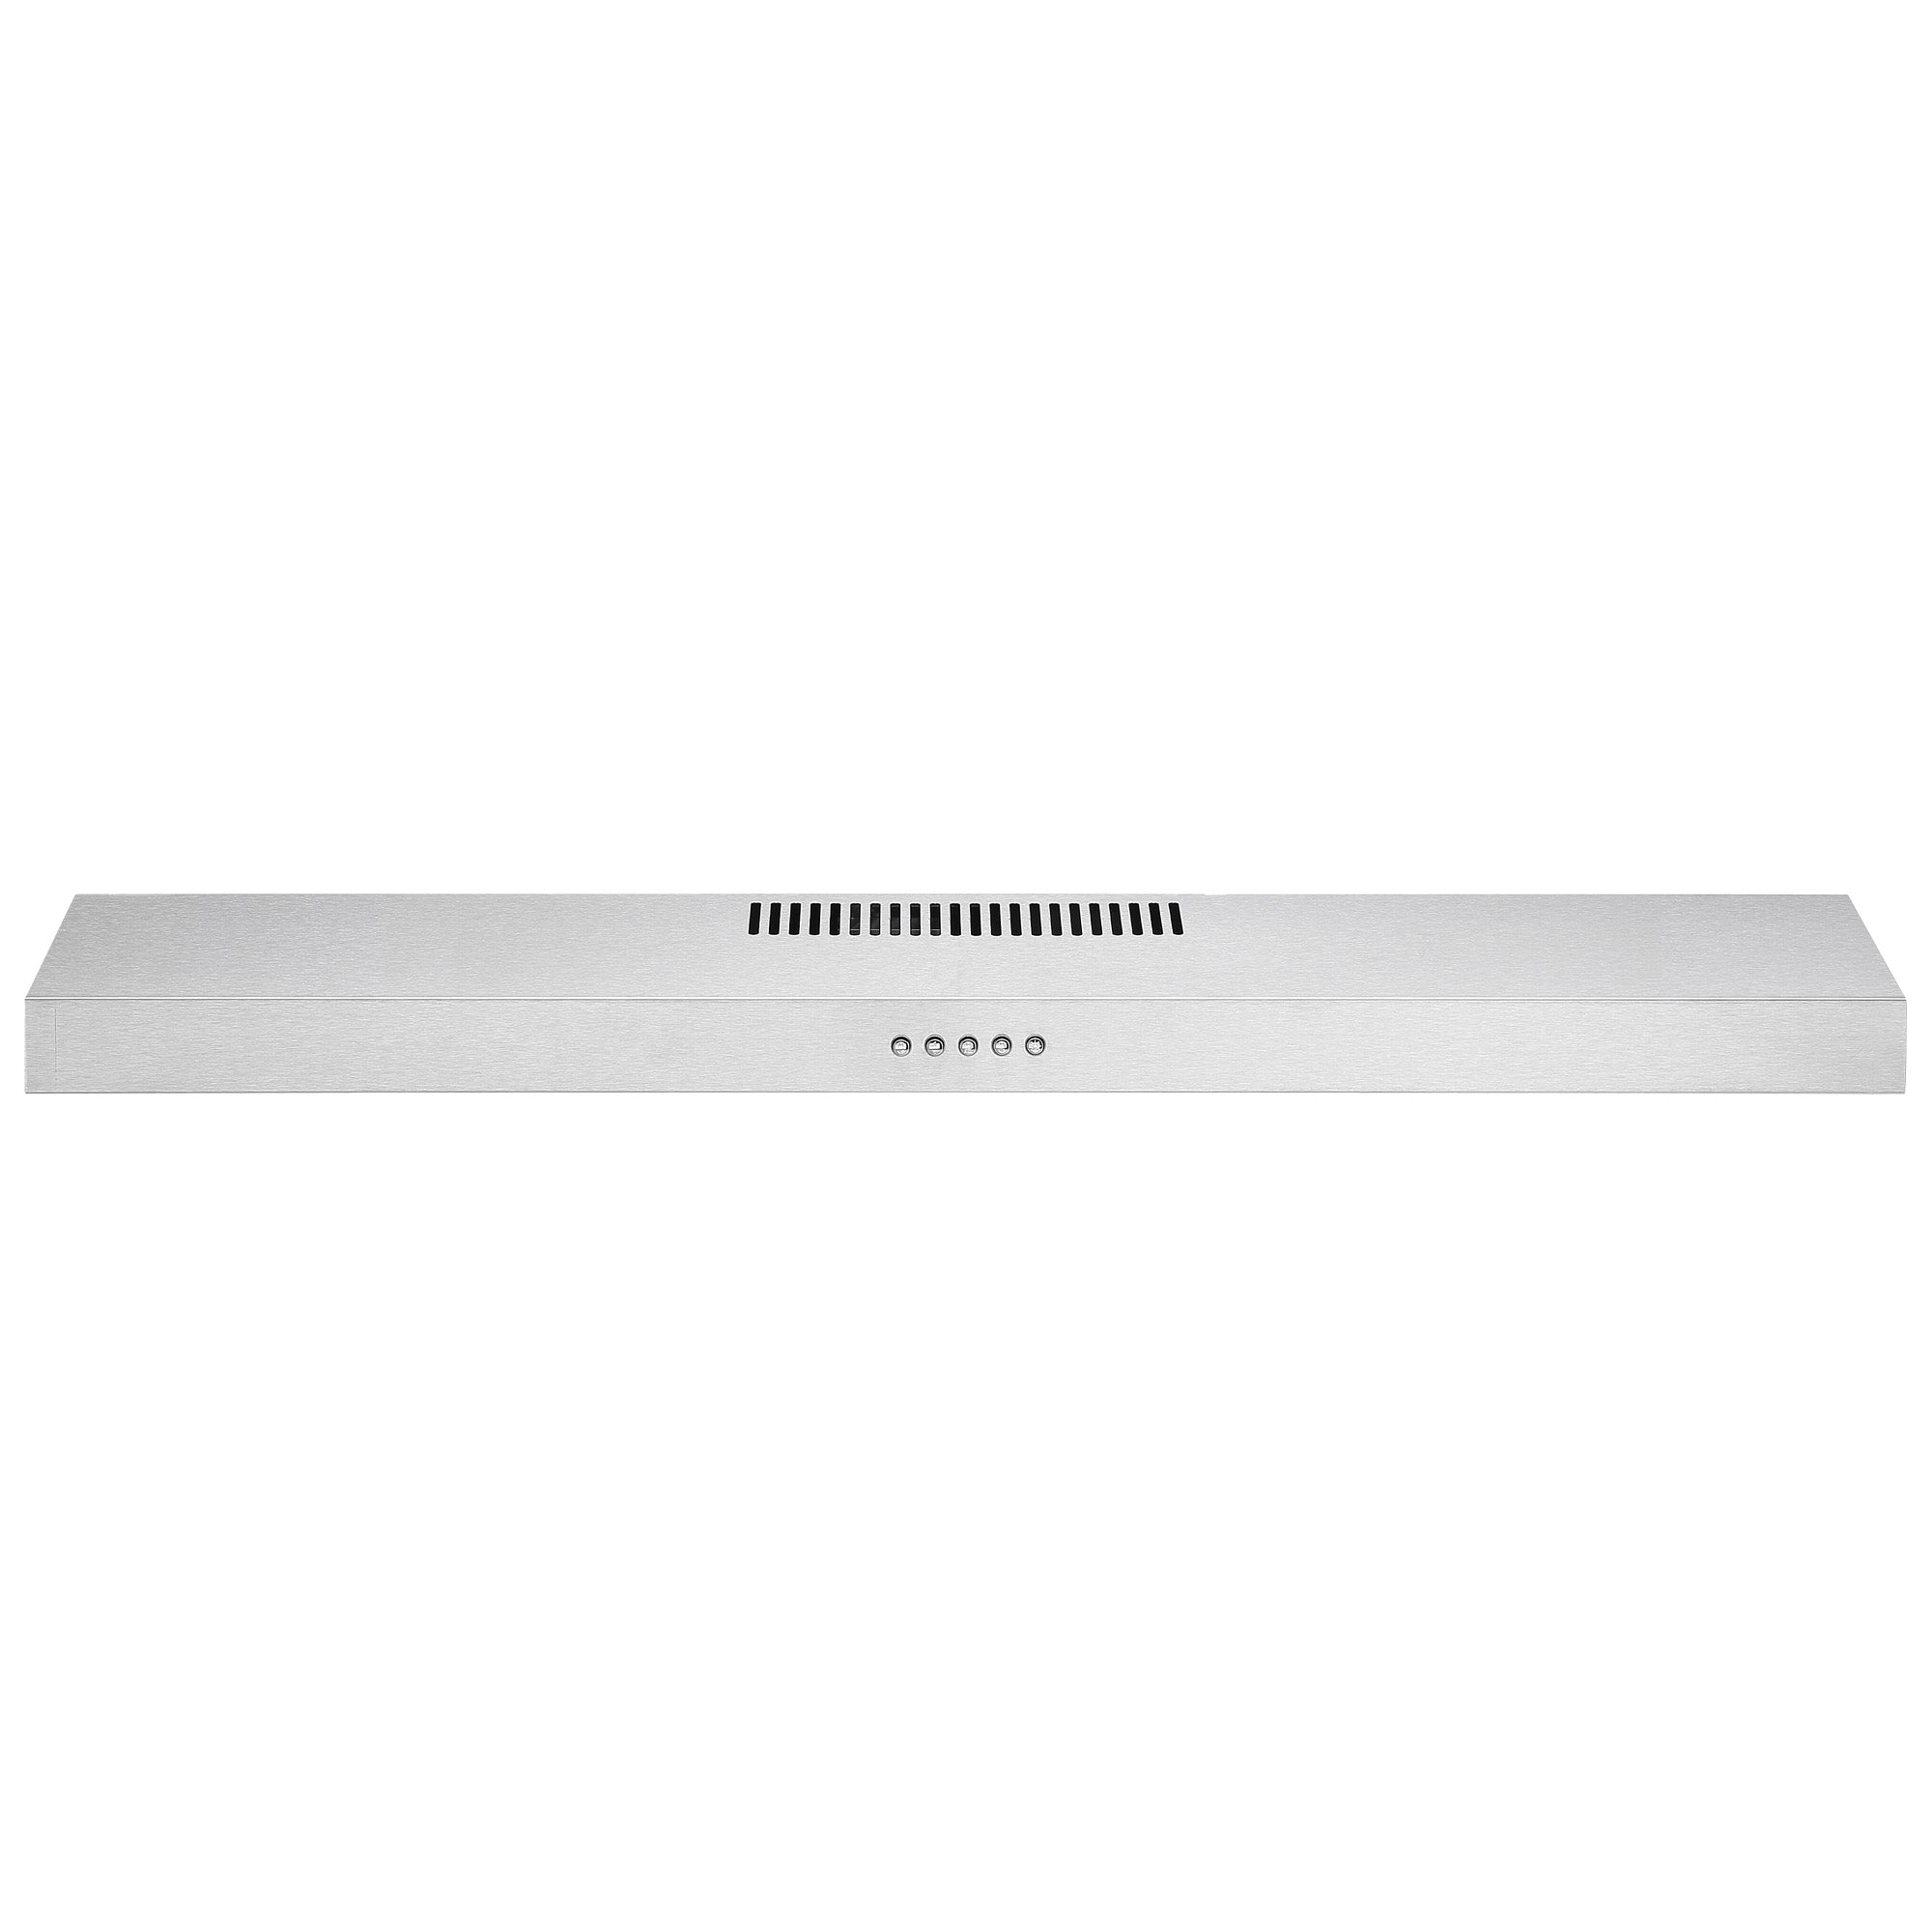 Ancona 36” 110 CFM Convertible Under Cabinet Range Hood in Stainless Steel